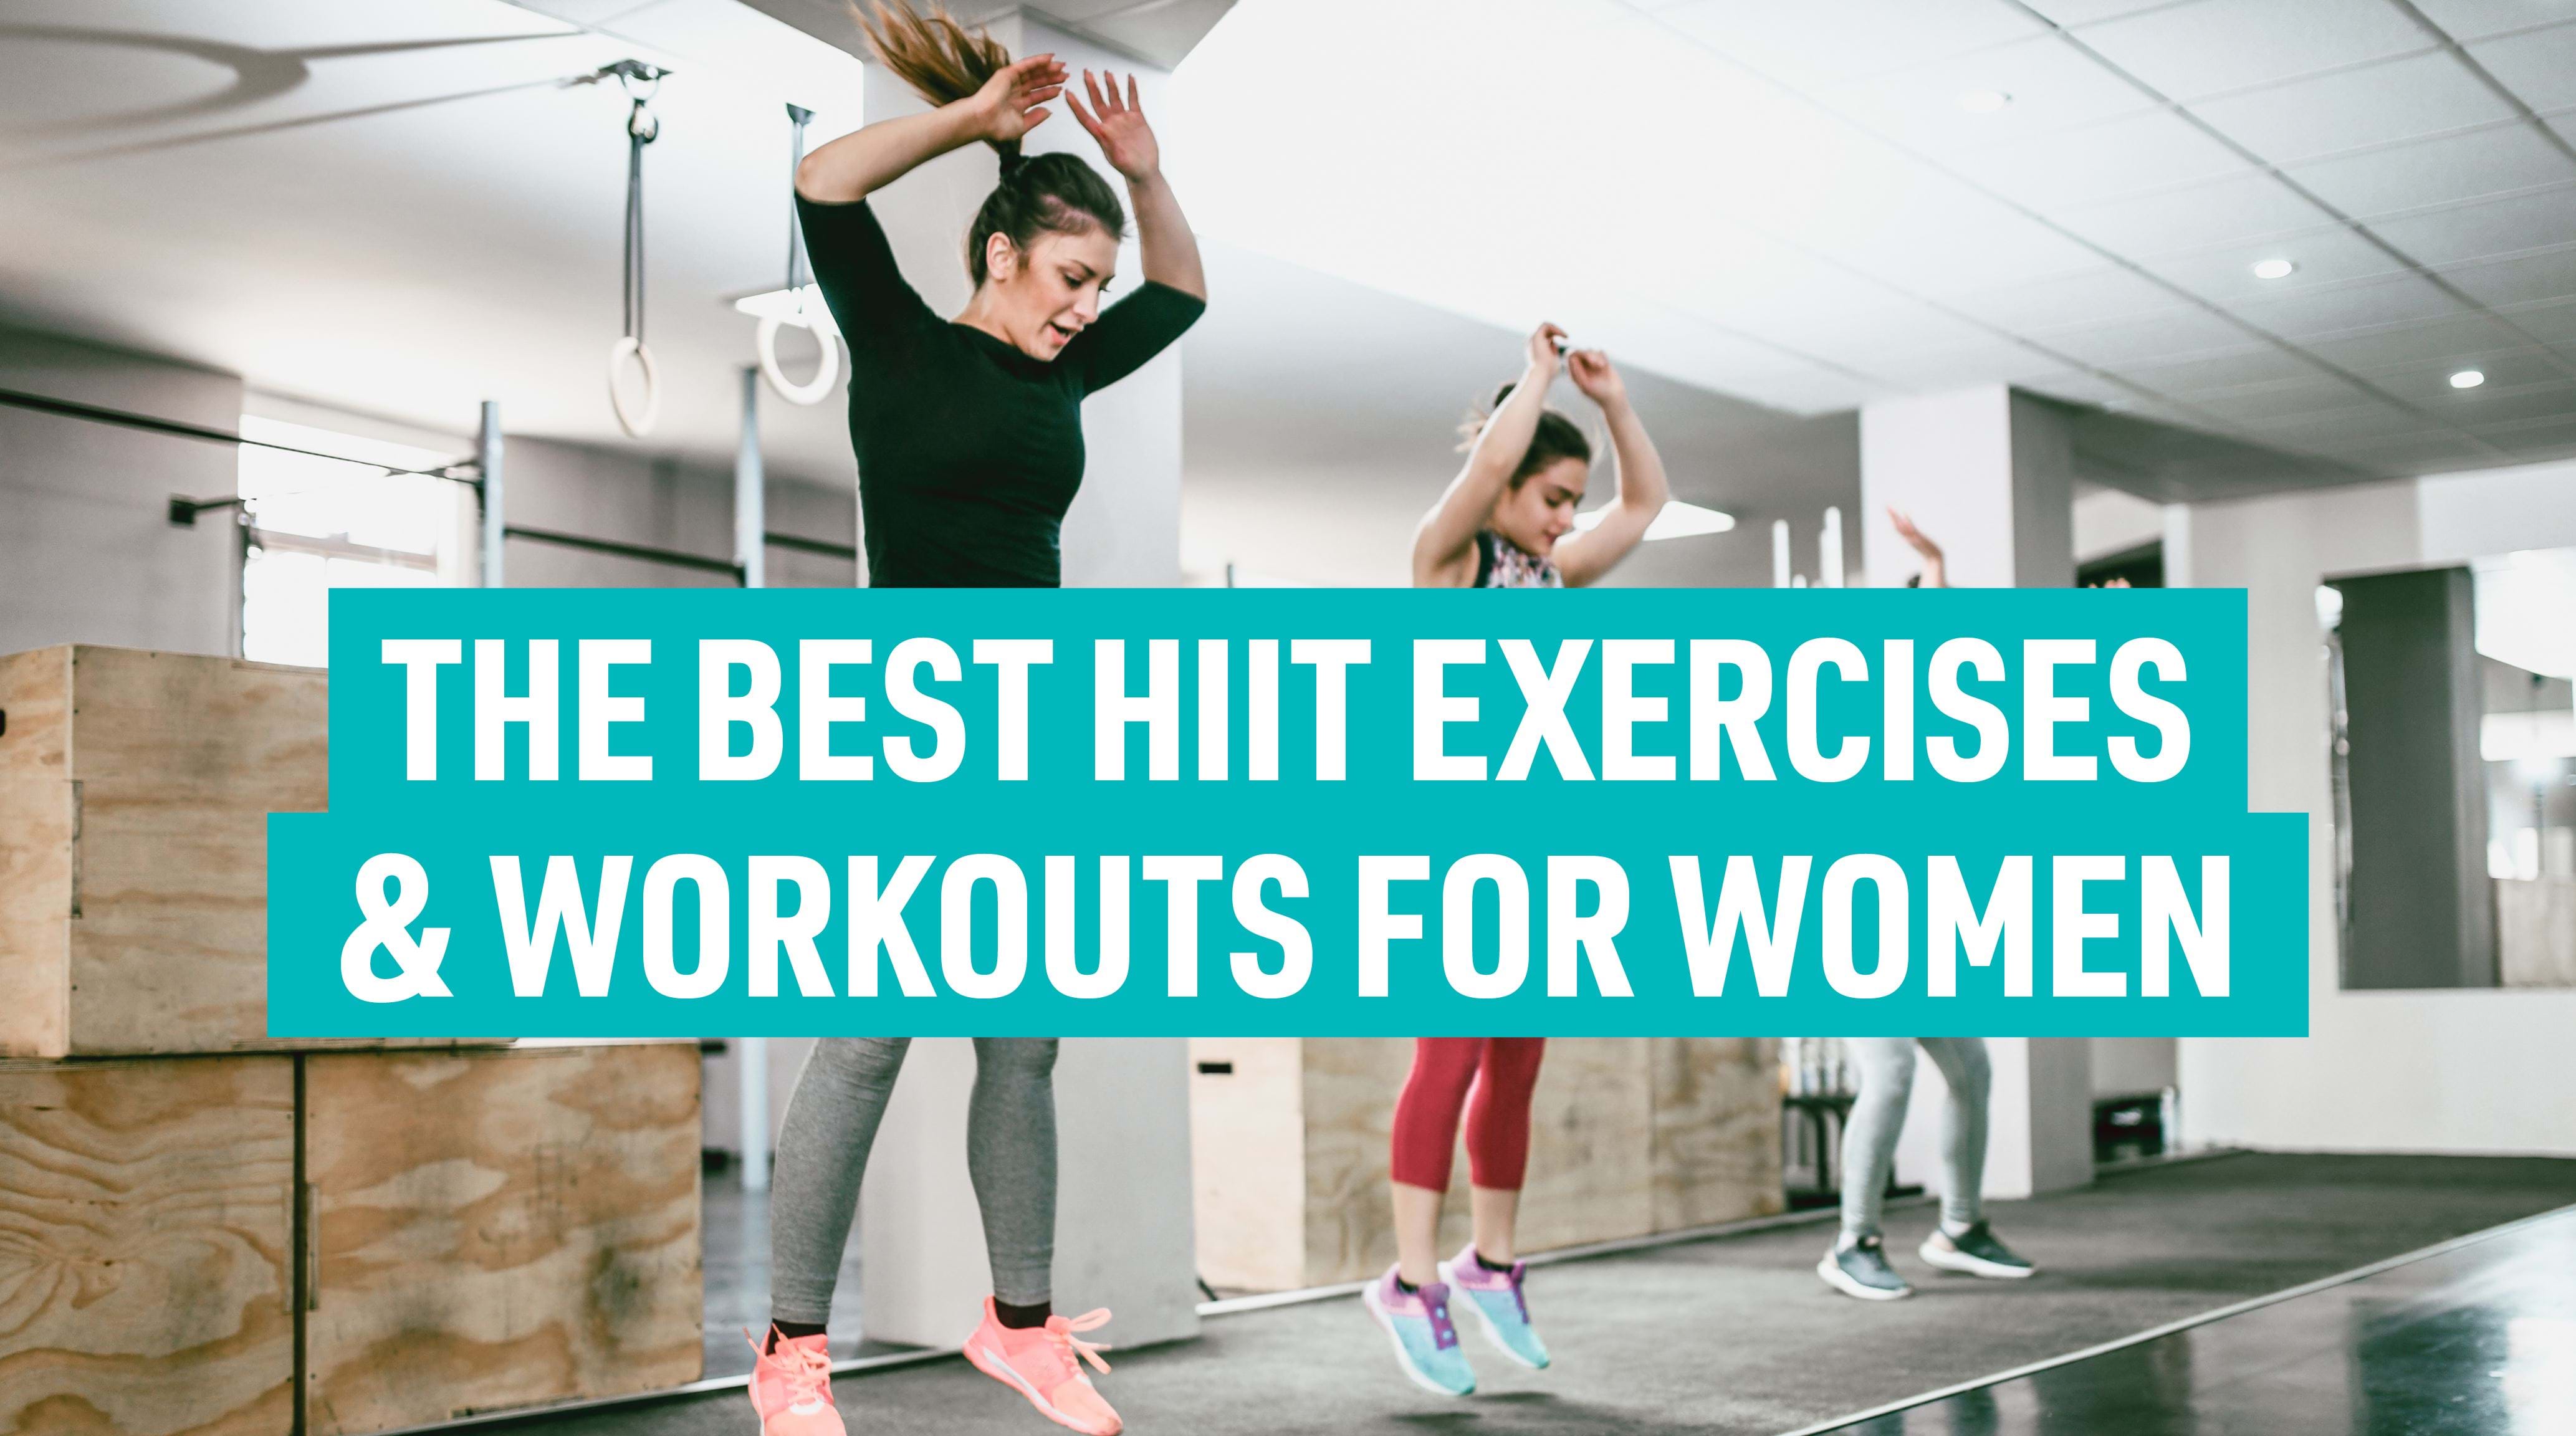 5 Free HIIT Workouts for Weight Loss (Home Training Plan